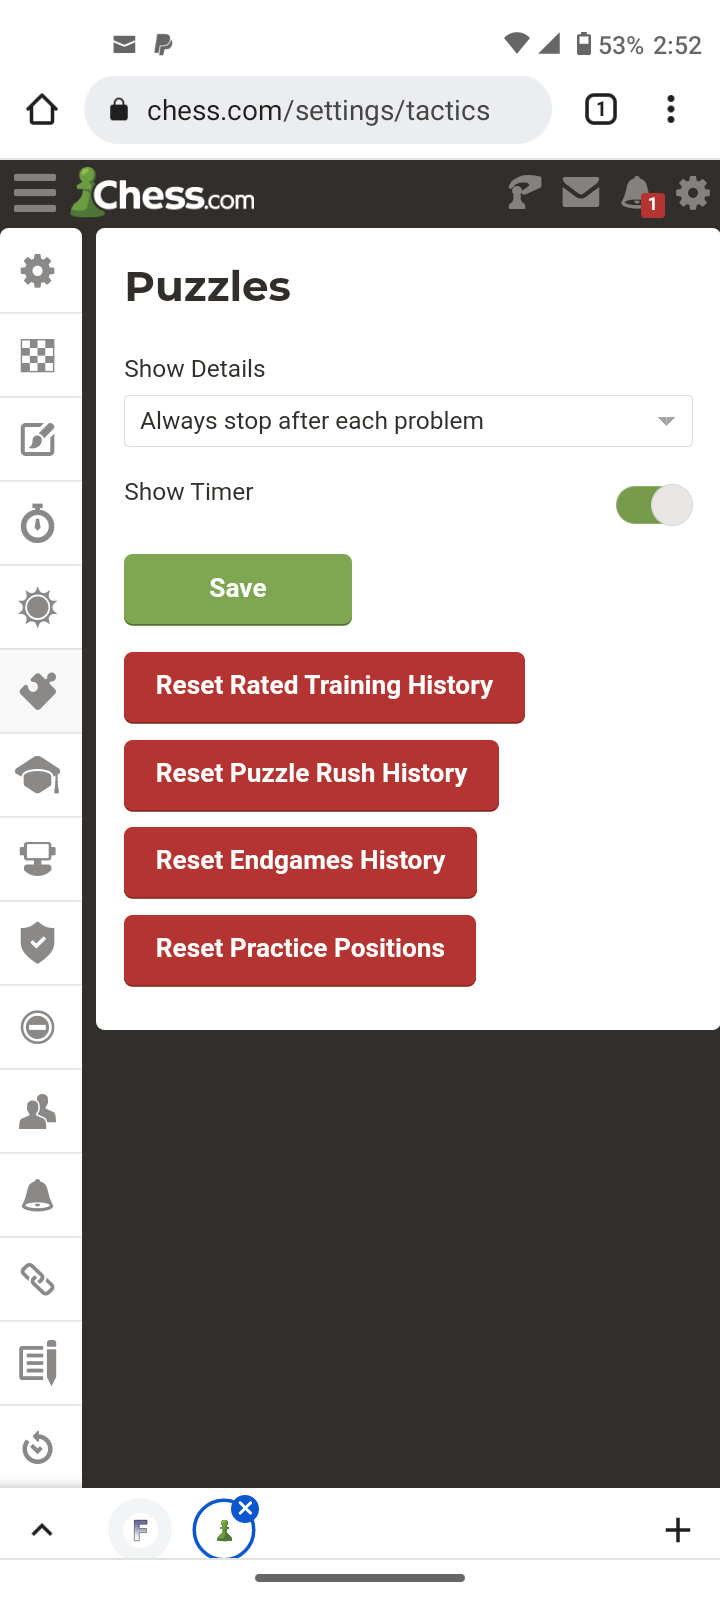 How do Puzzle ratings work? - Chess.com Member Support and FAQs